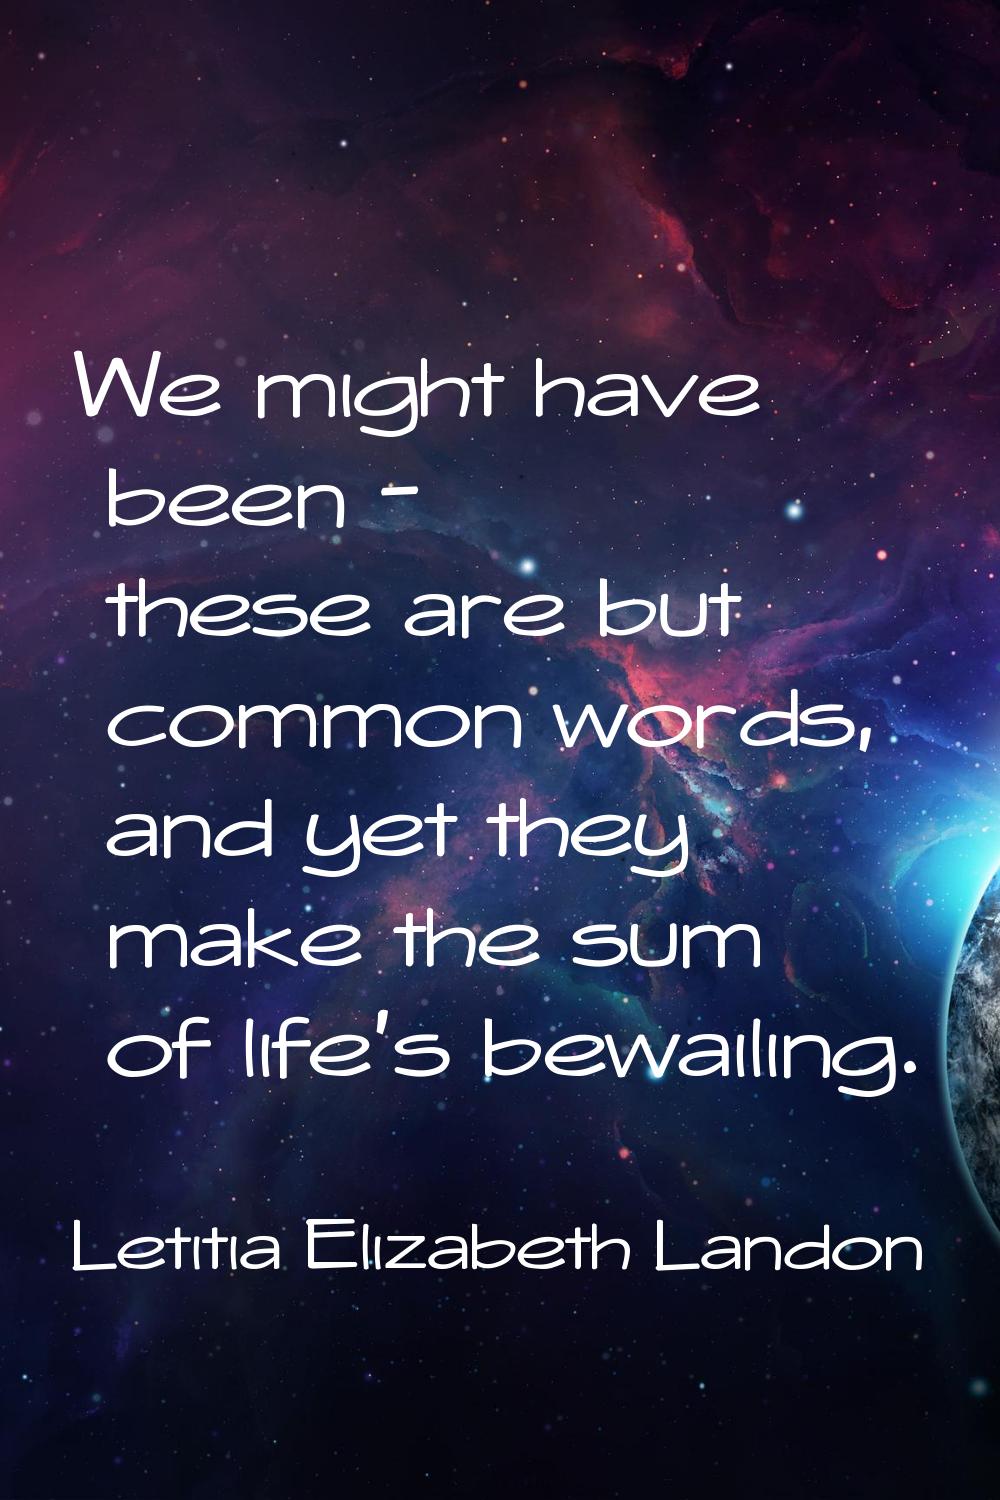 We might have been - these are but common words, and yet they make the sum of life's bewailing.